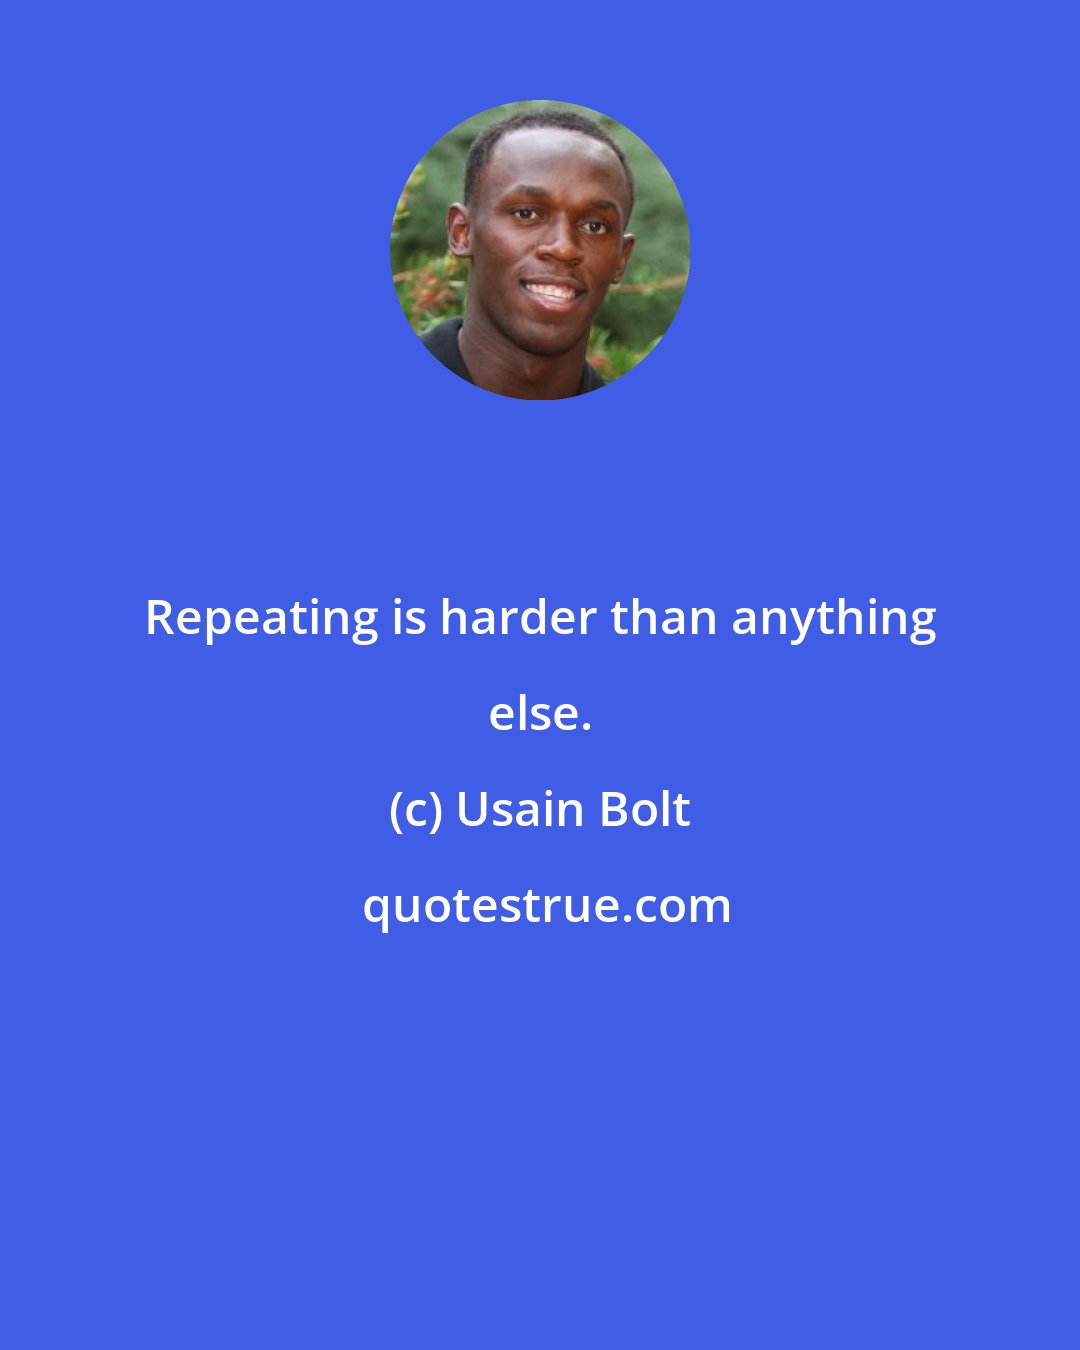 Usain Bolt: Repeating is harder than anything else.